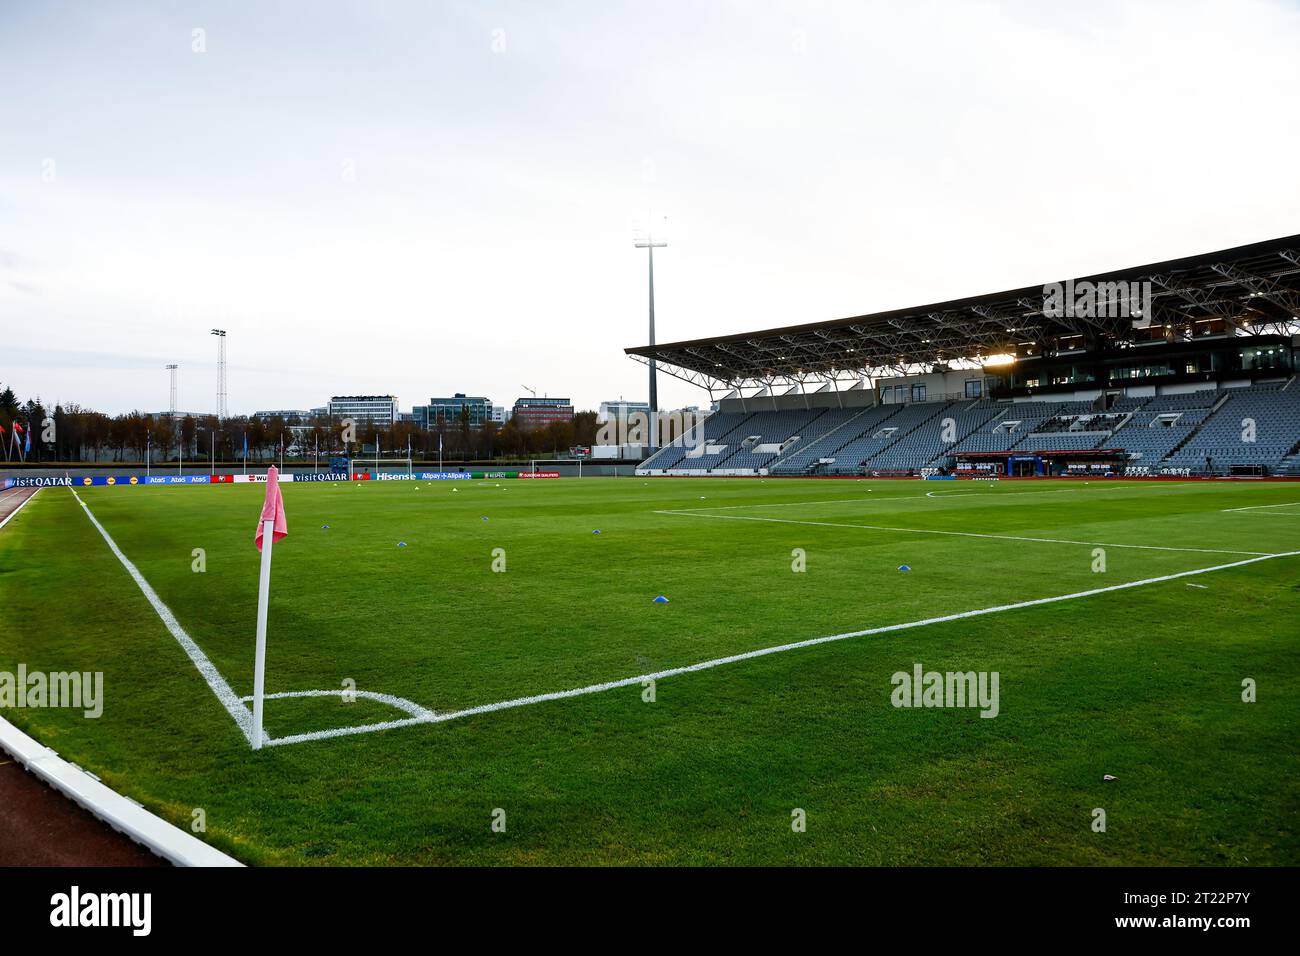 Iceland. 16th Oct, 2023. Reykjavik, Iceland, October 16th 2023: General view inside the stadium Laugardalsvollur during the UEFA European Qualifiers football match between Iceland and Liechtenstein at Laugardalsvollur in Reykjavik, Iceland. (Gunnar Örn Árnason/SPP) Credit: SPP Sport Press Photo. /Alamy Live News Stock Photo